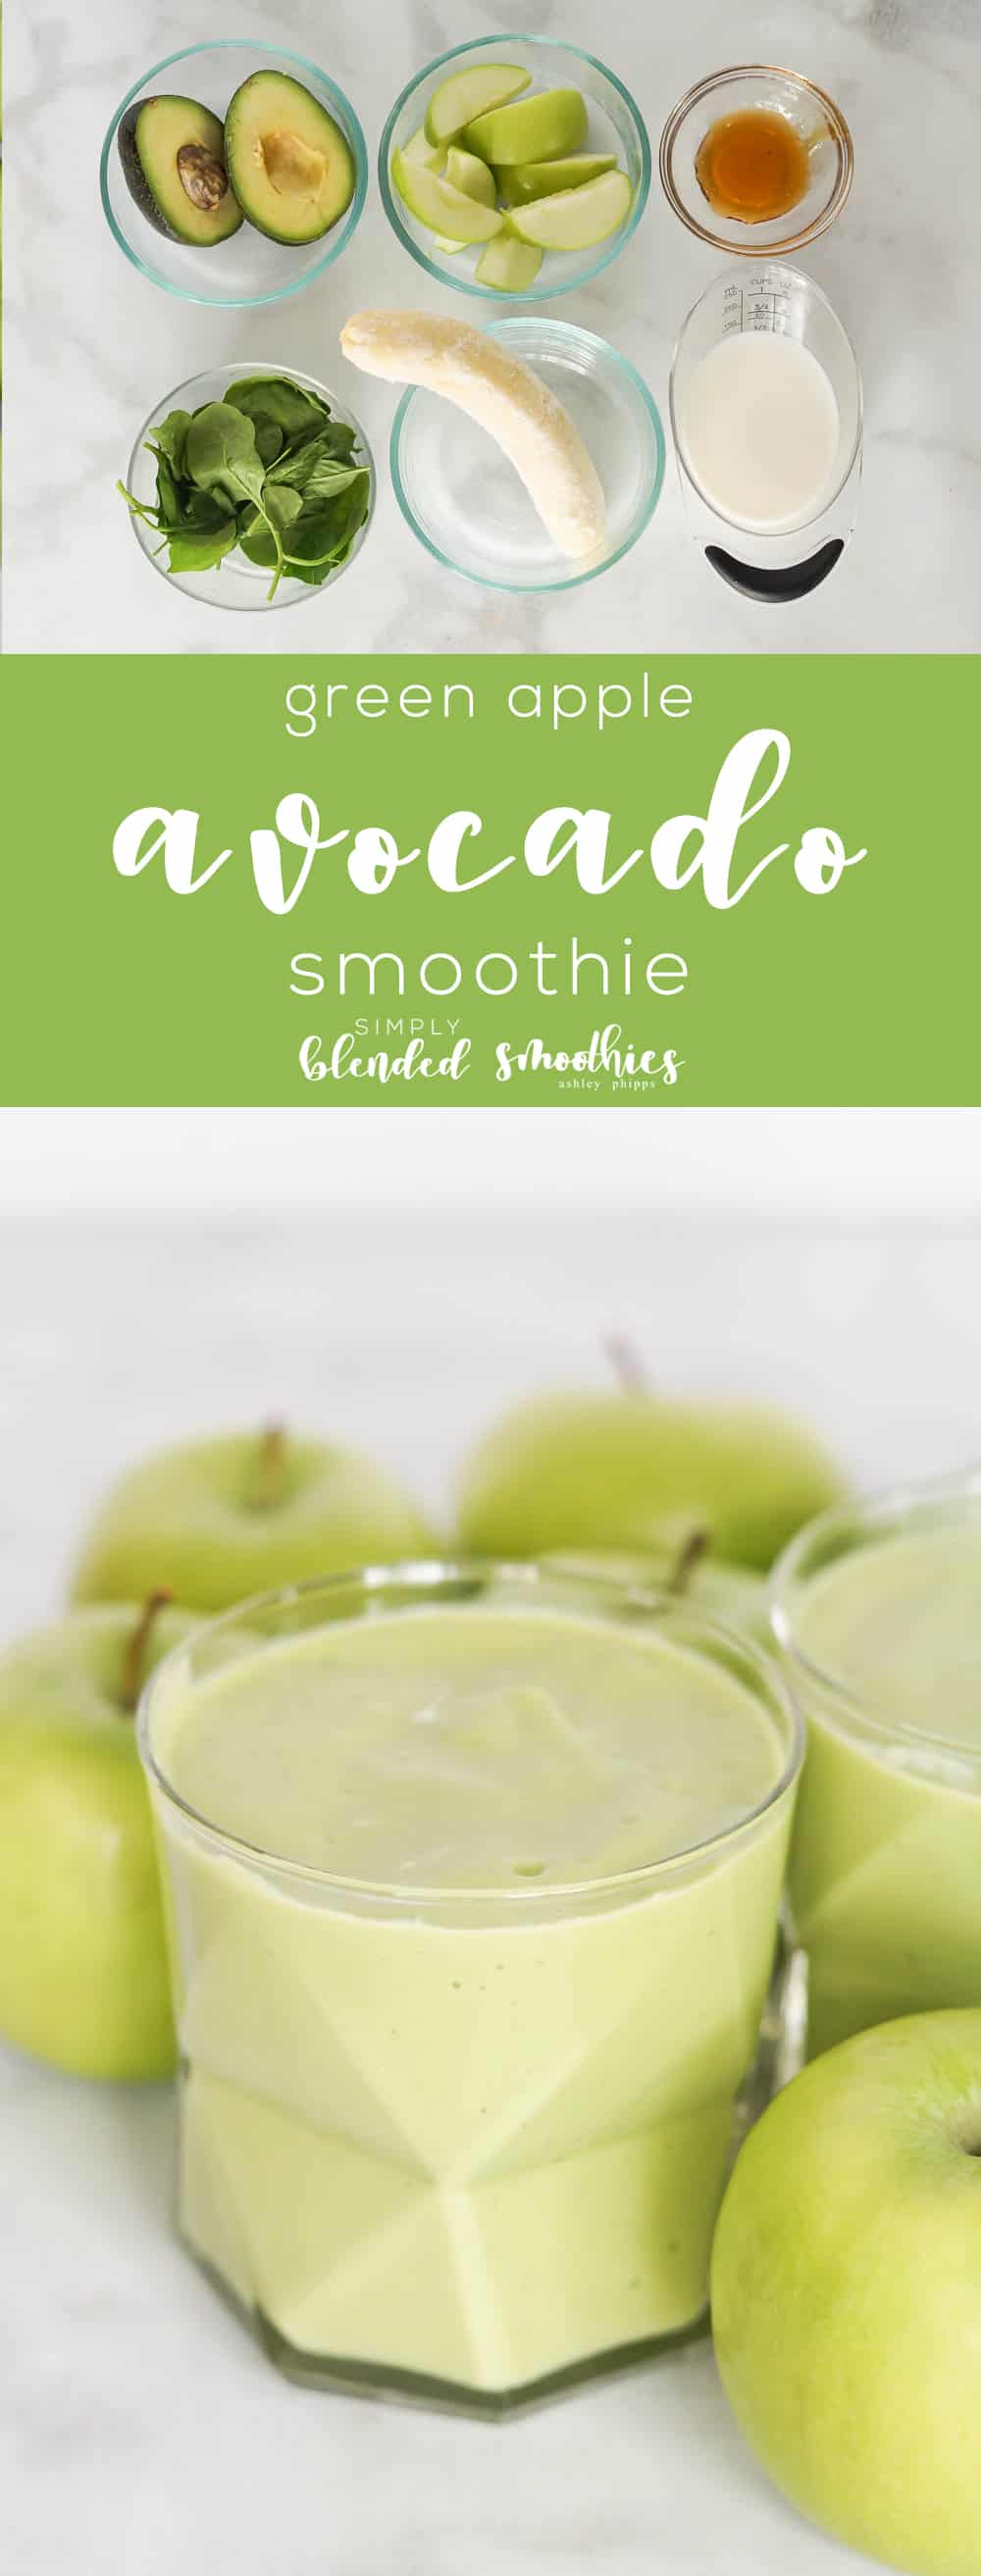 Green Apple And Avocado Smoothie - This Deliciously Smooth And Tart Smoothie